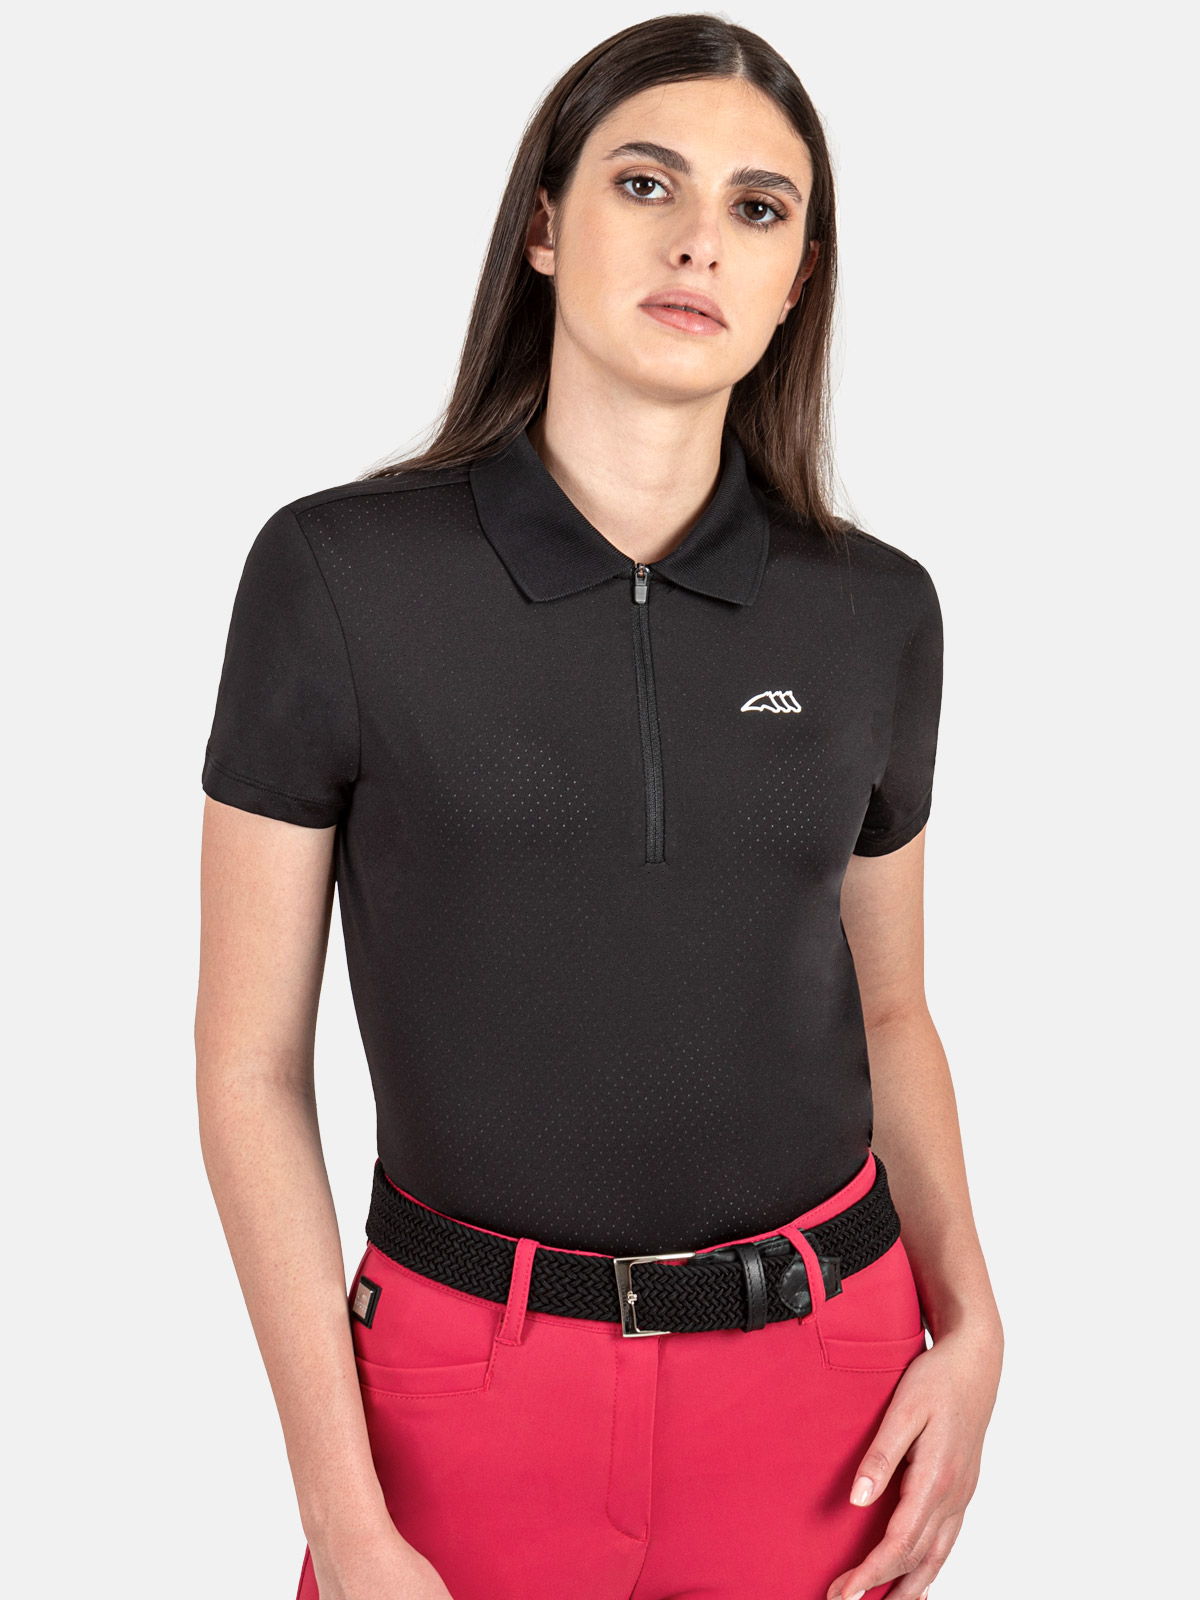 Equiline Equiline Damen Polo Shirt Carenc - blue - S - 2